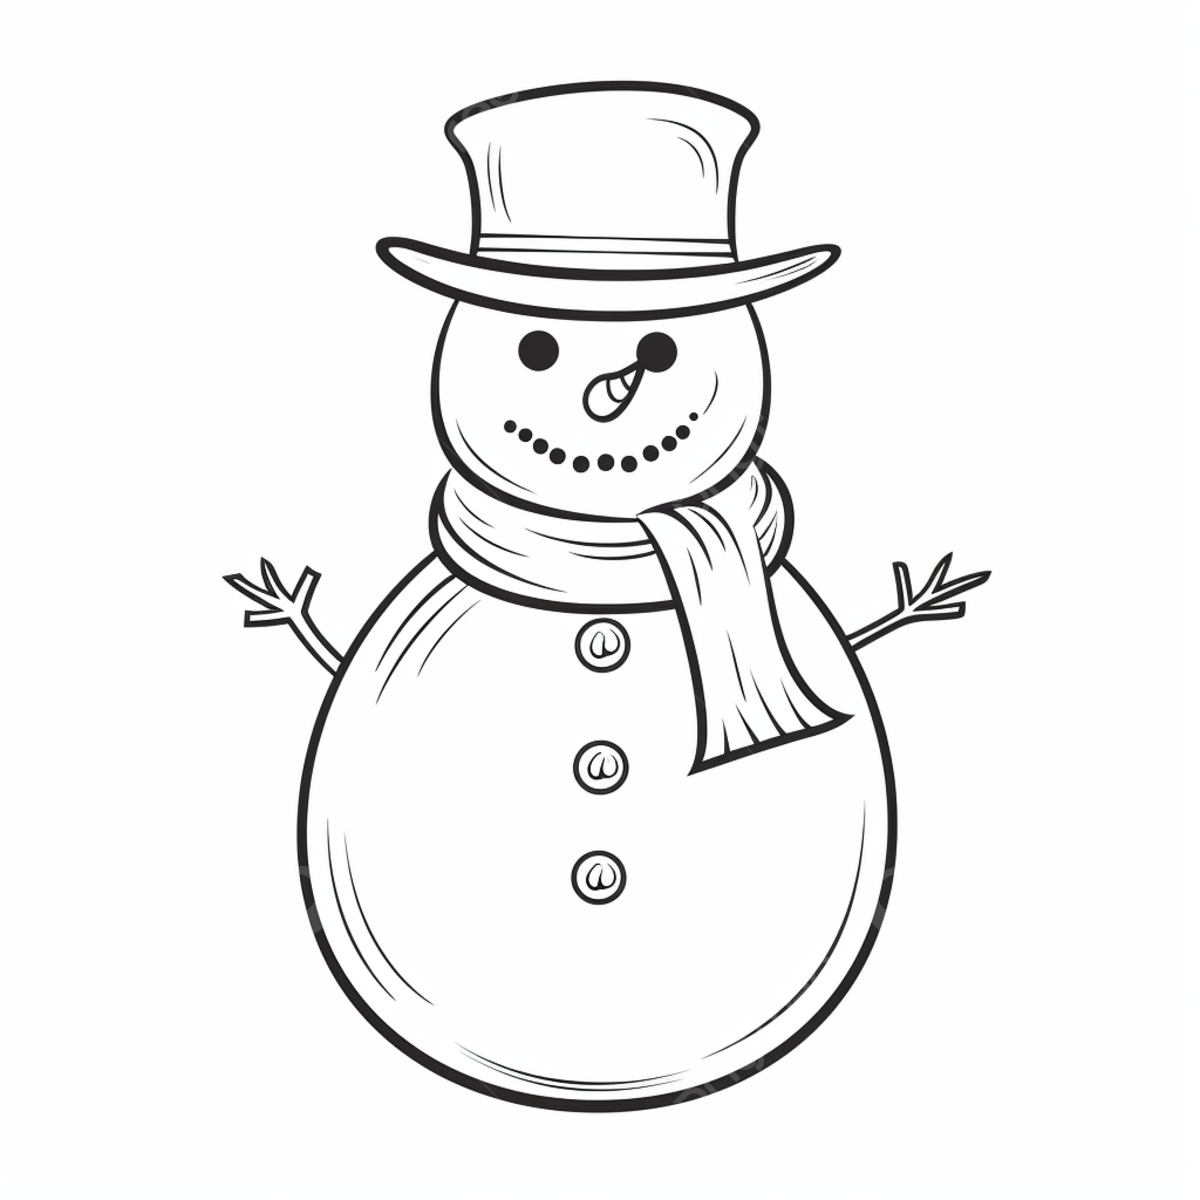 Snowman coloring page on white background snow drawing man drawing ring drawing png transparent image and clipart for free download